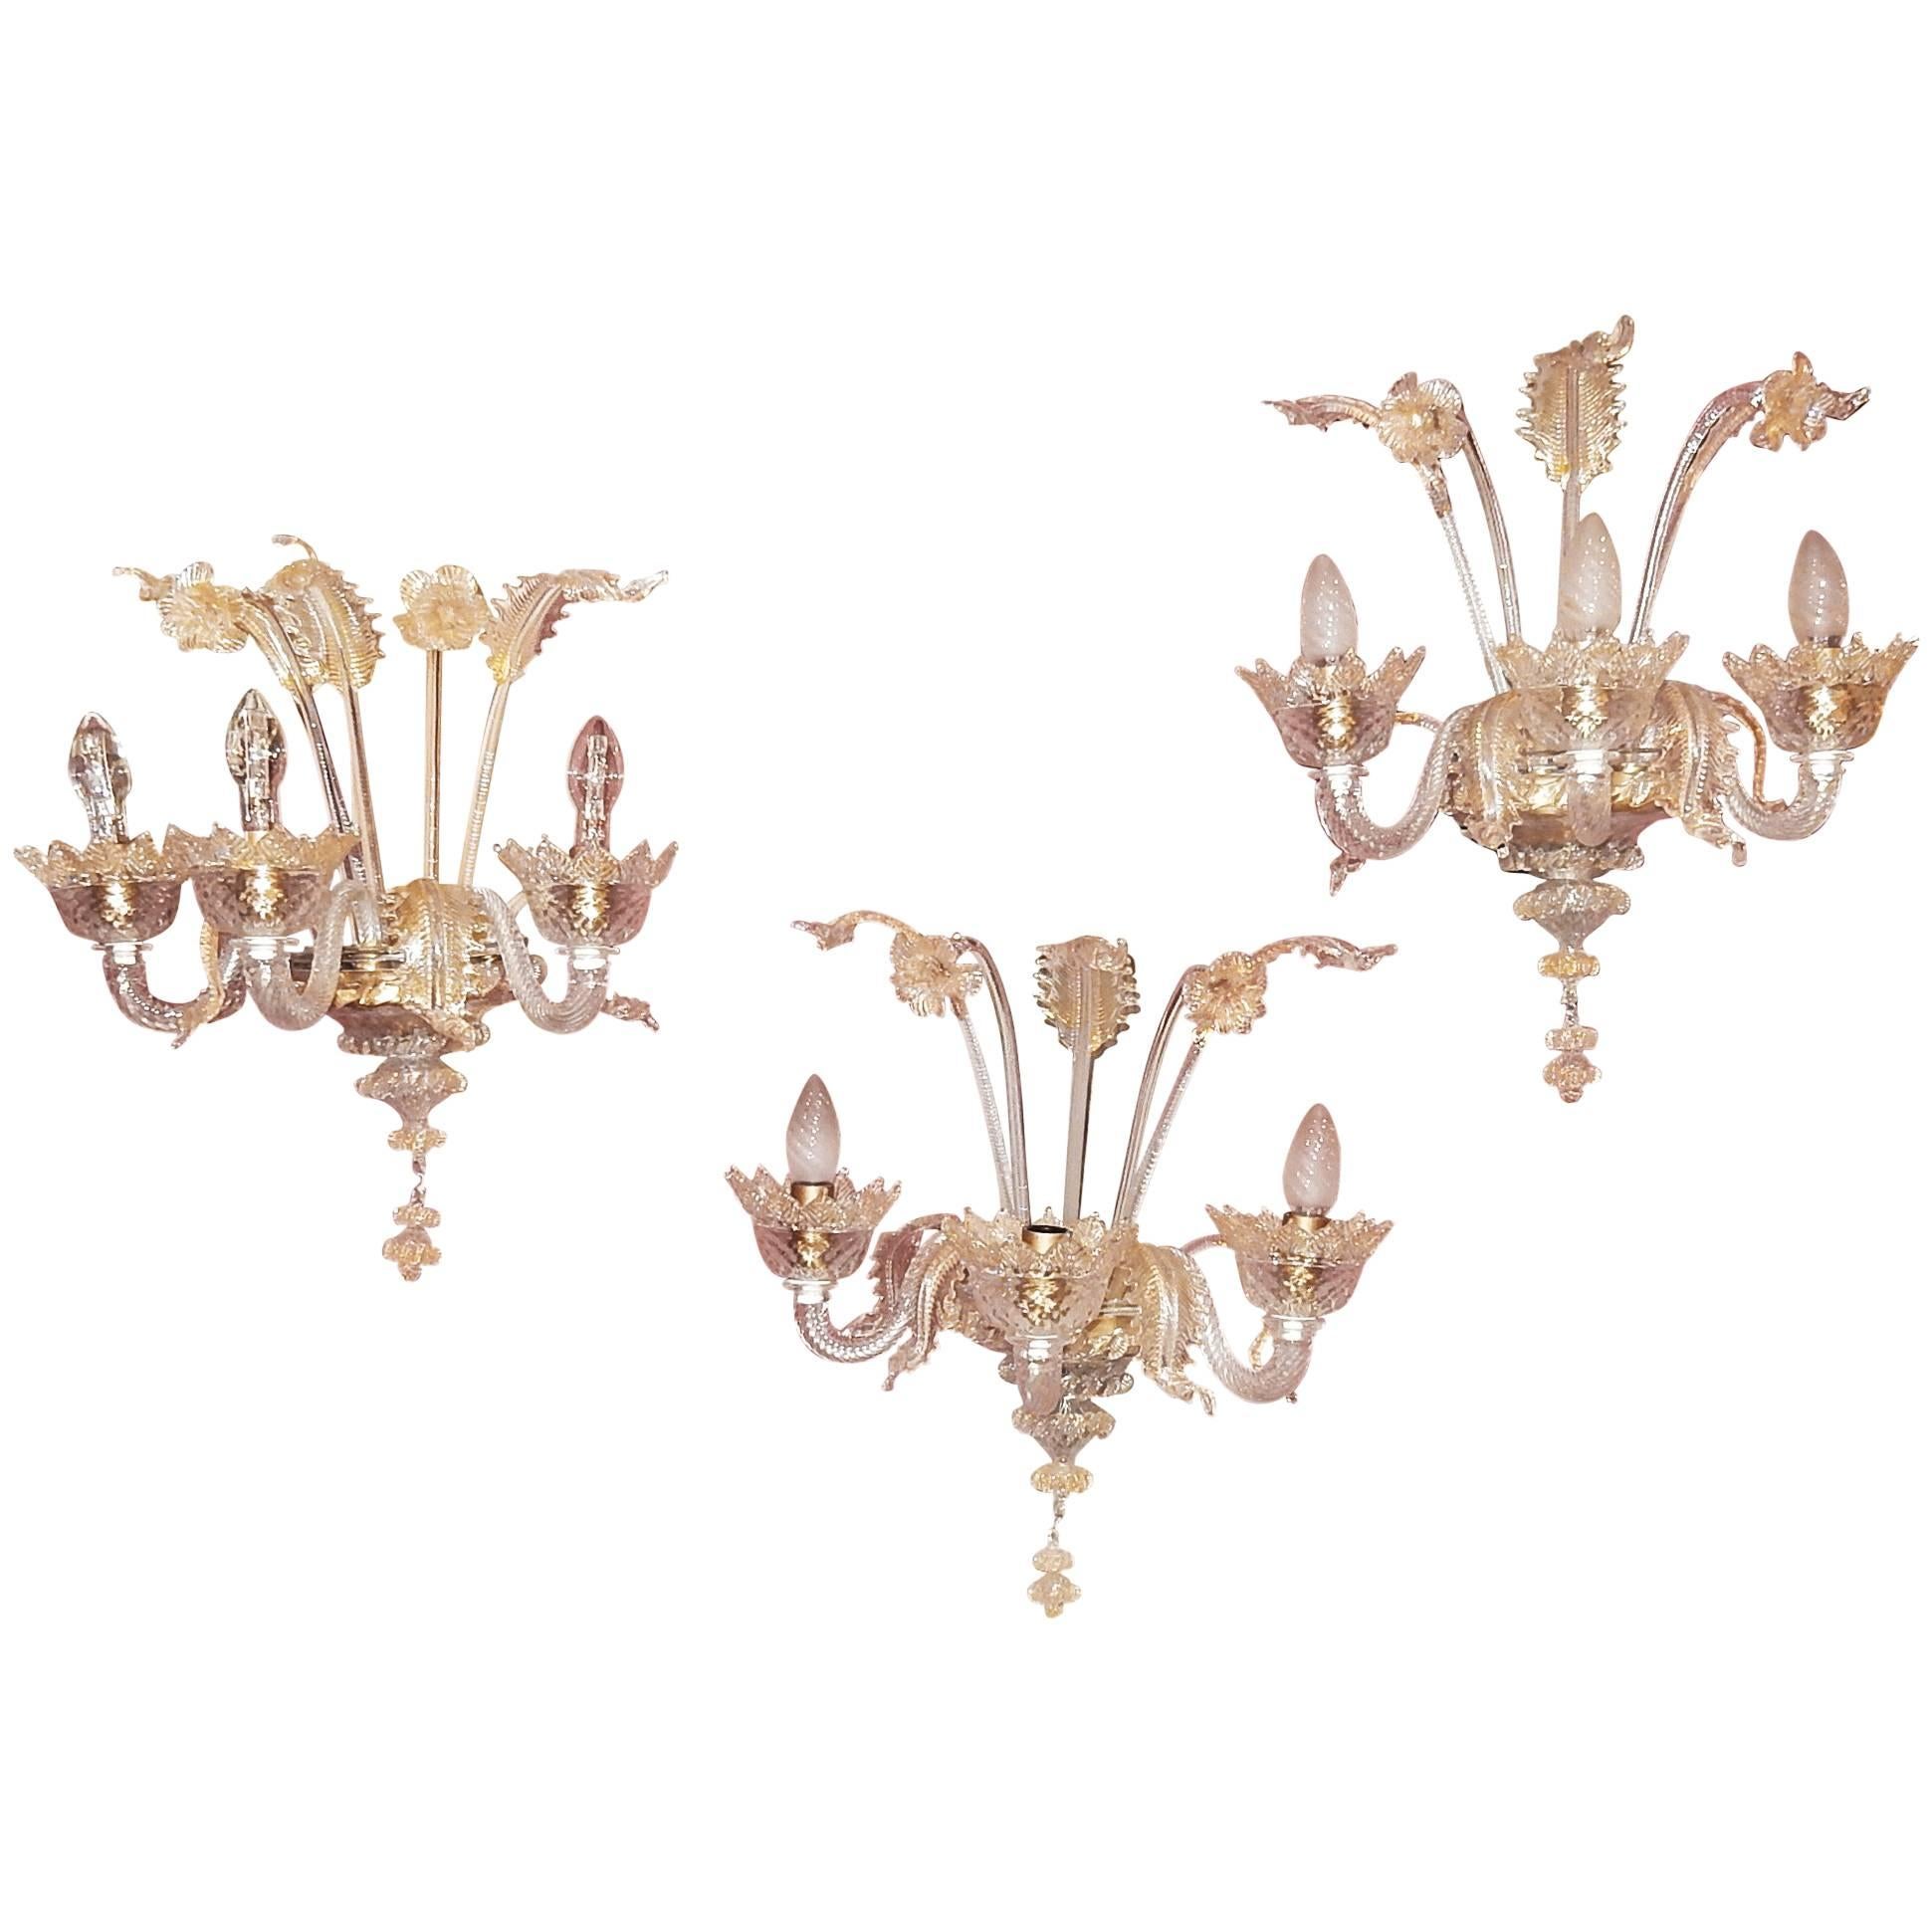 Three Wall Lamps Has Three Arms of Light, Crystal of Murano, Straws of Gold